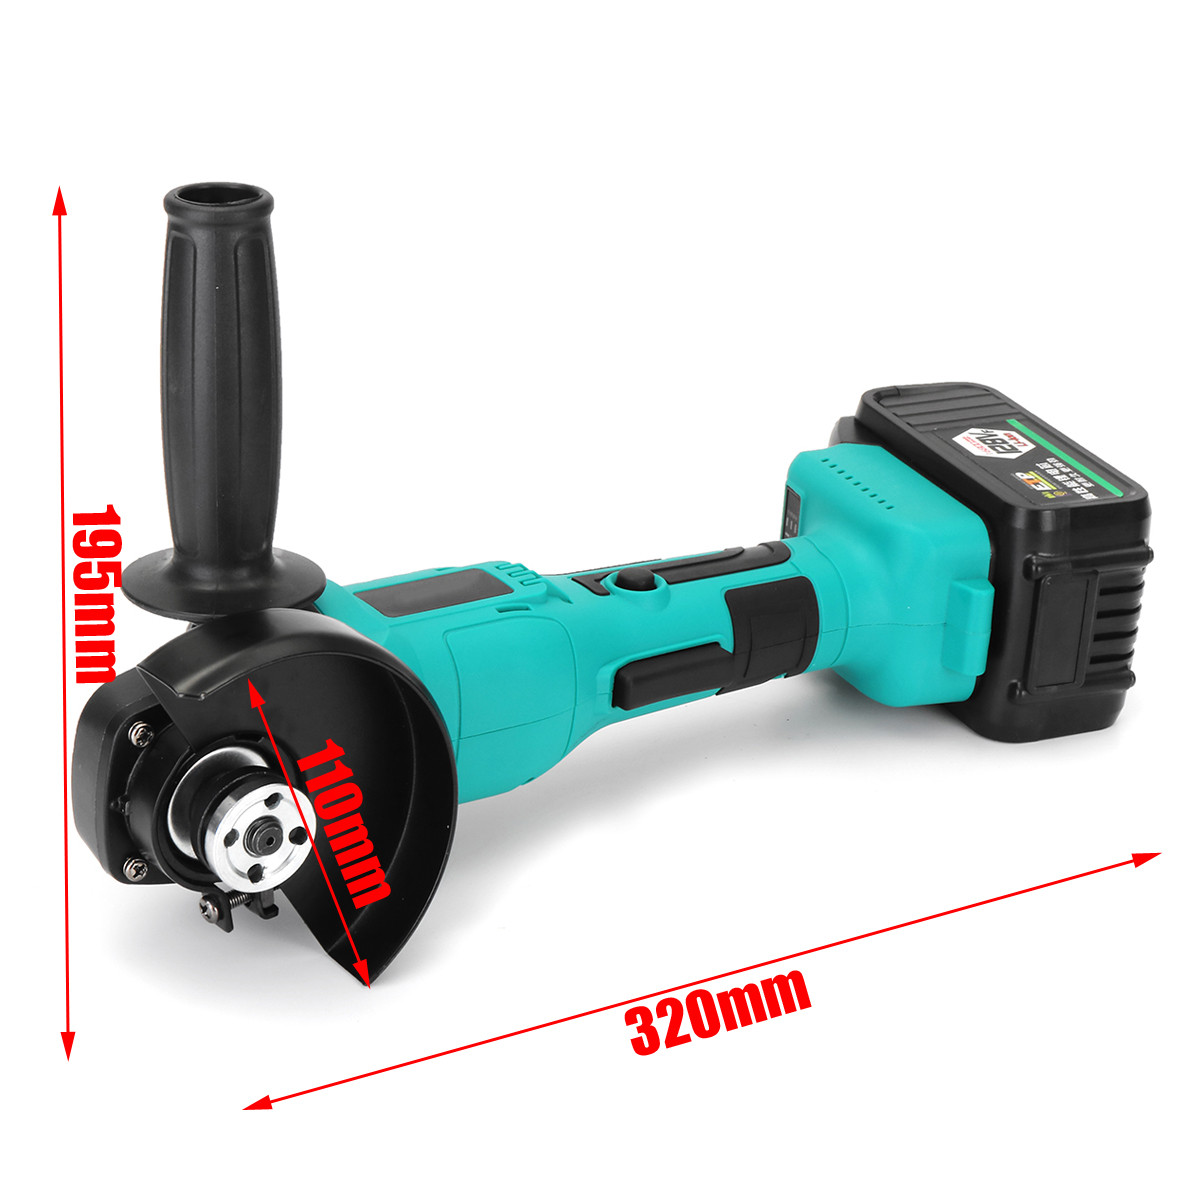 128VF-1300W-10000RPM-Cordless-Brushless-Angle-Grinder-with-16800mAh-Li-Ion-Battery-1520444-5